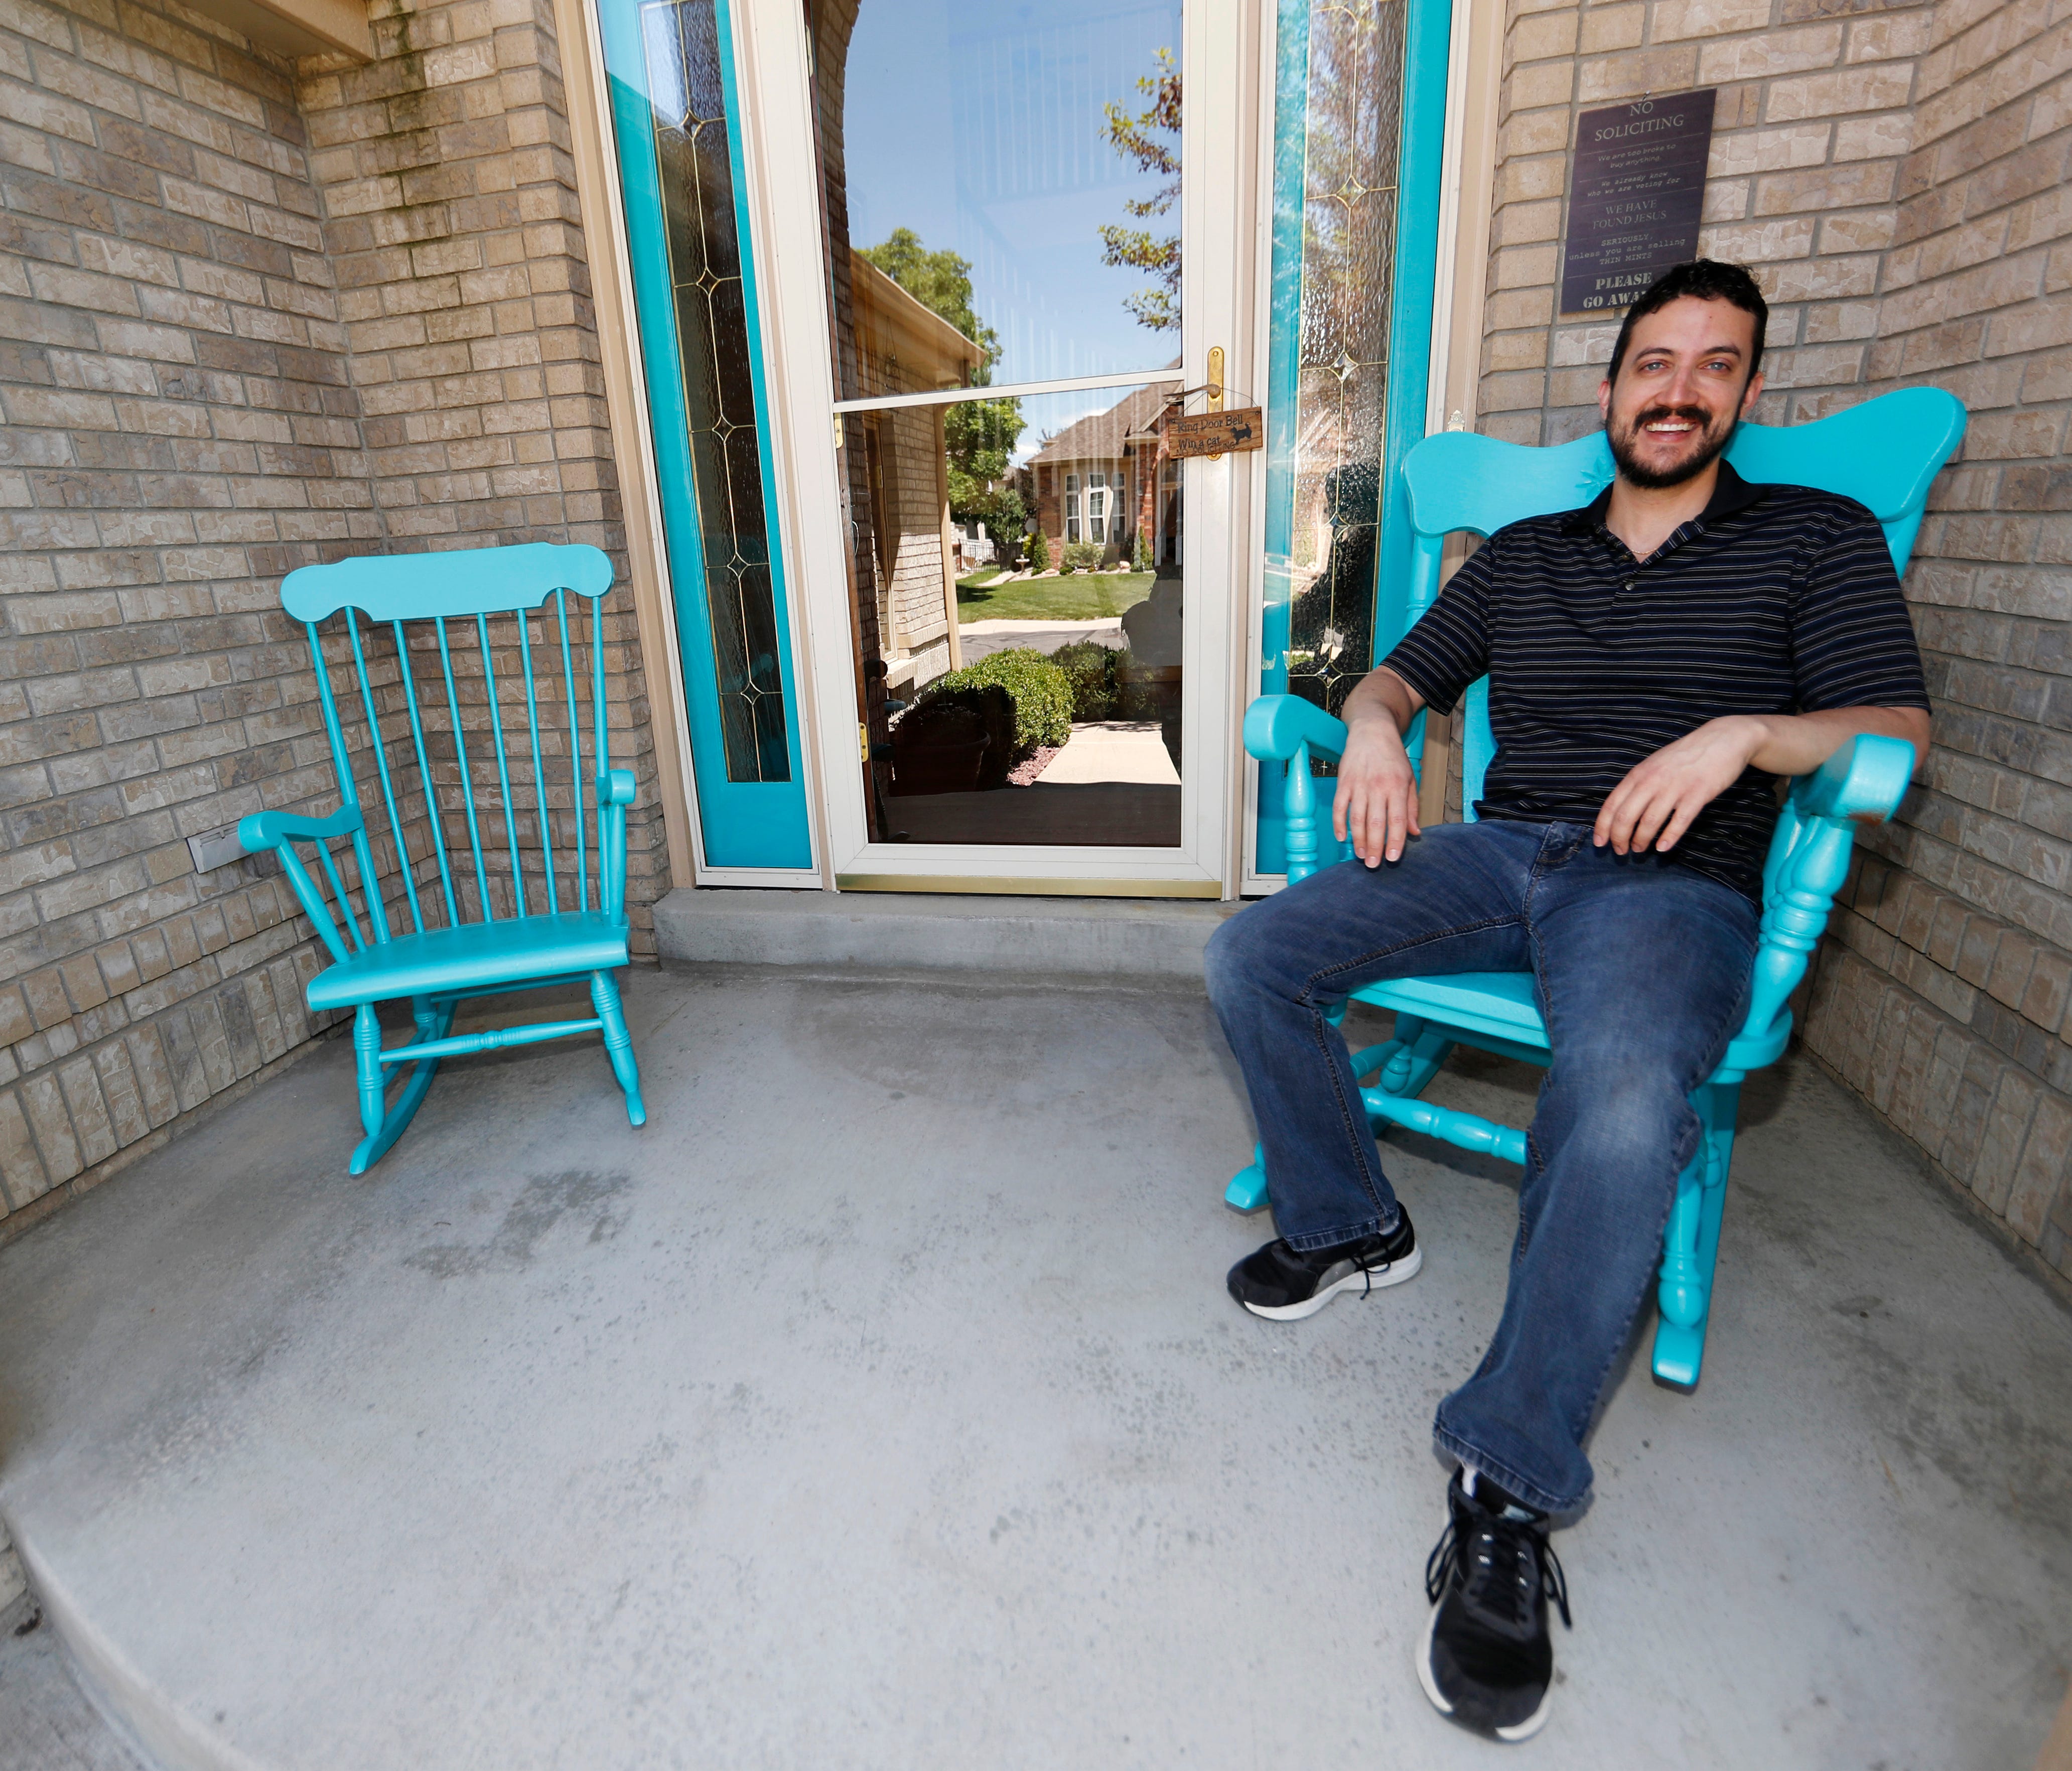 Danny Aguilar takes a seat in one of the rocking chair on the front porch of his home in Lakewood, Colo. Aguilar, like nearly half of Americans surveyed in a new poll conducted by The Associated Press-NORC Center Public Affairs Research, said they wi